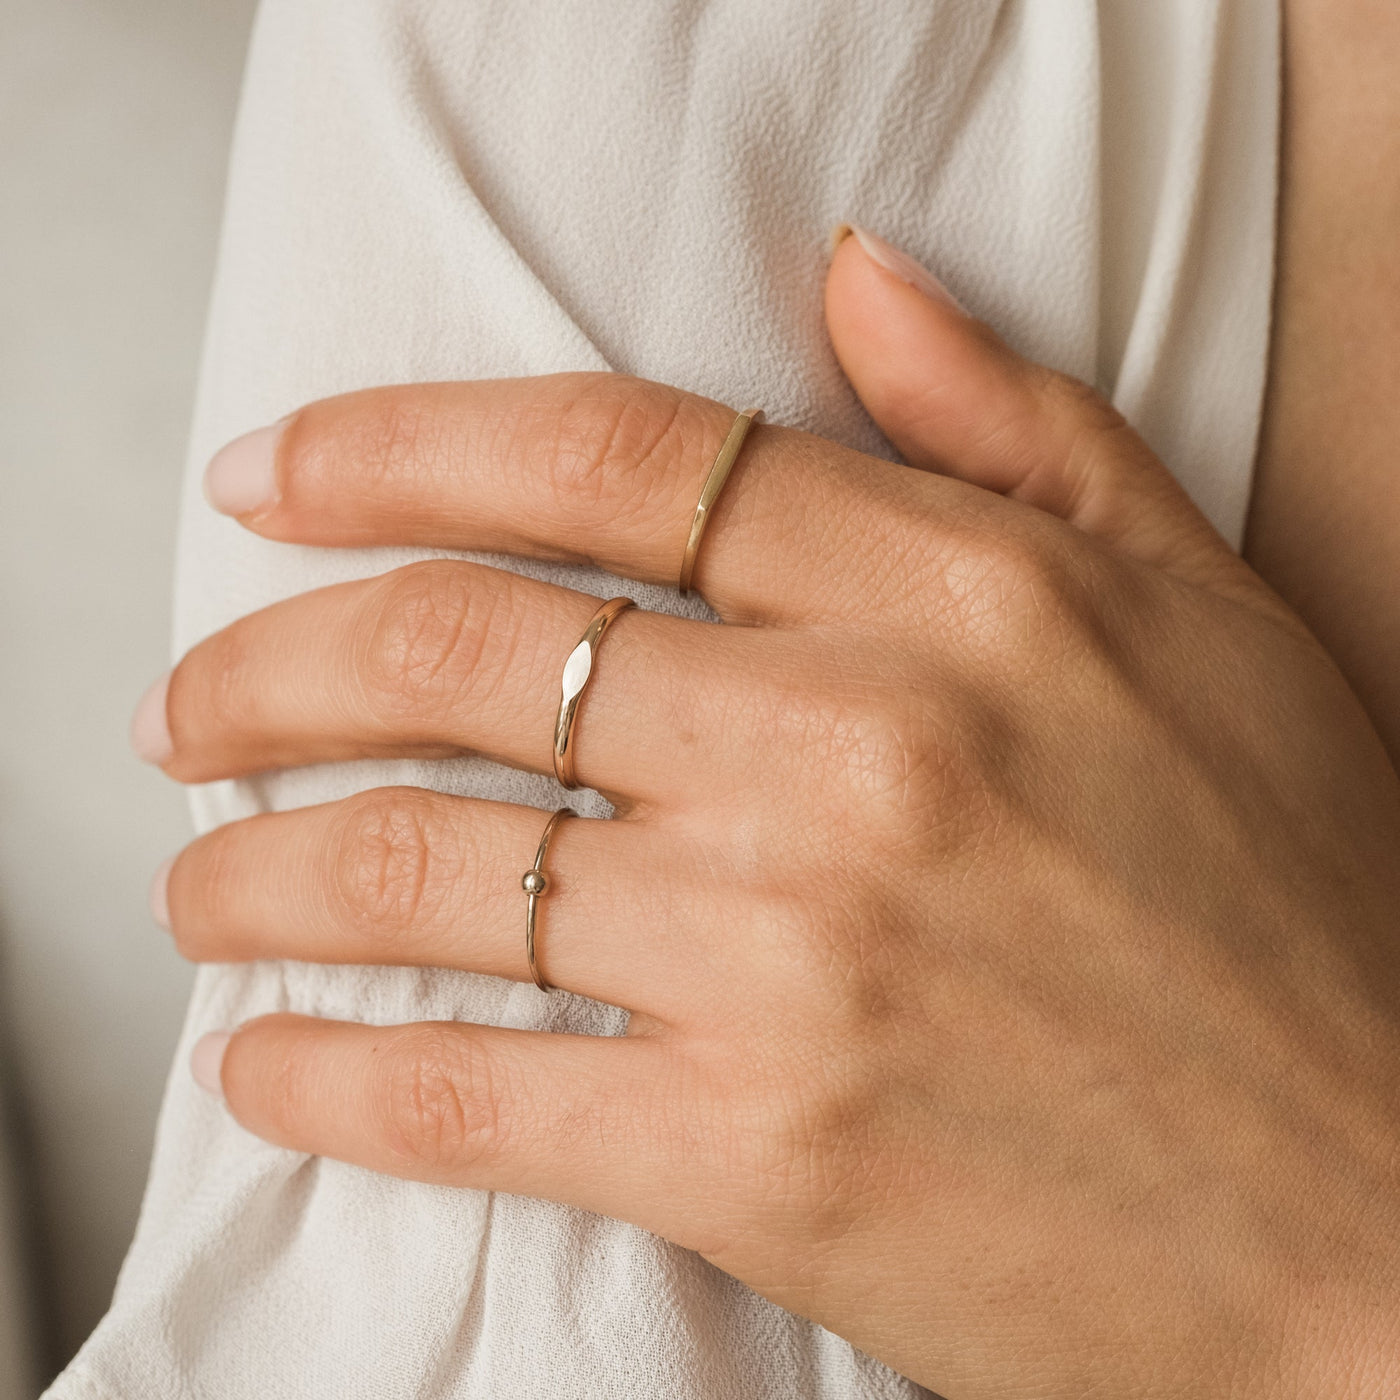  Stamped Blank , Initial Signet Ring | Simple & Dainty Jewelry